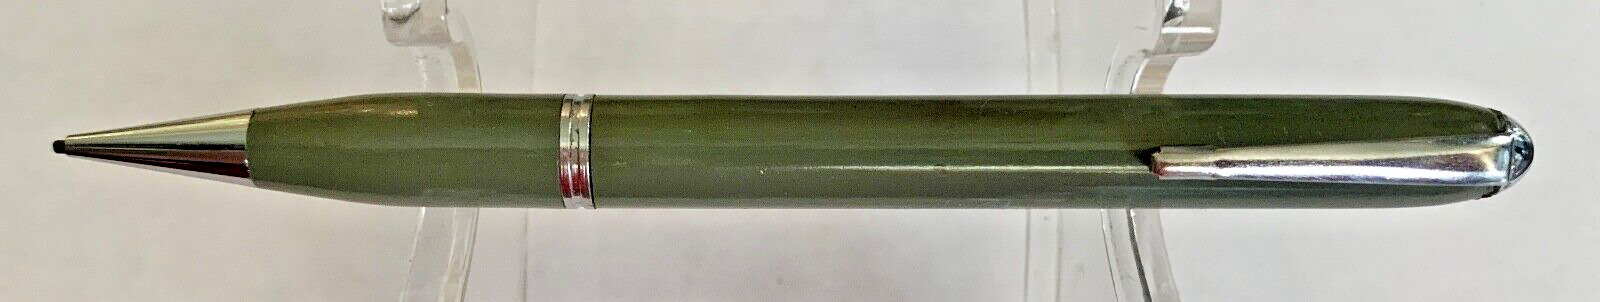 VINTAGE UNBRANDED ADVERTISING MECHANICAL PENCIL, GREEN W/ CHROME TONE, 1960'S